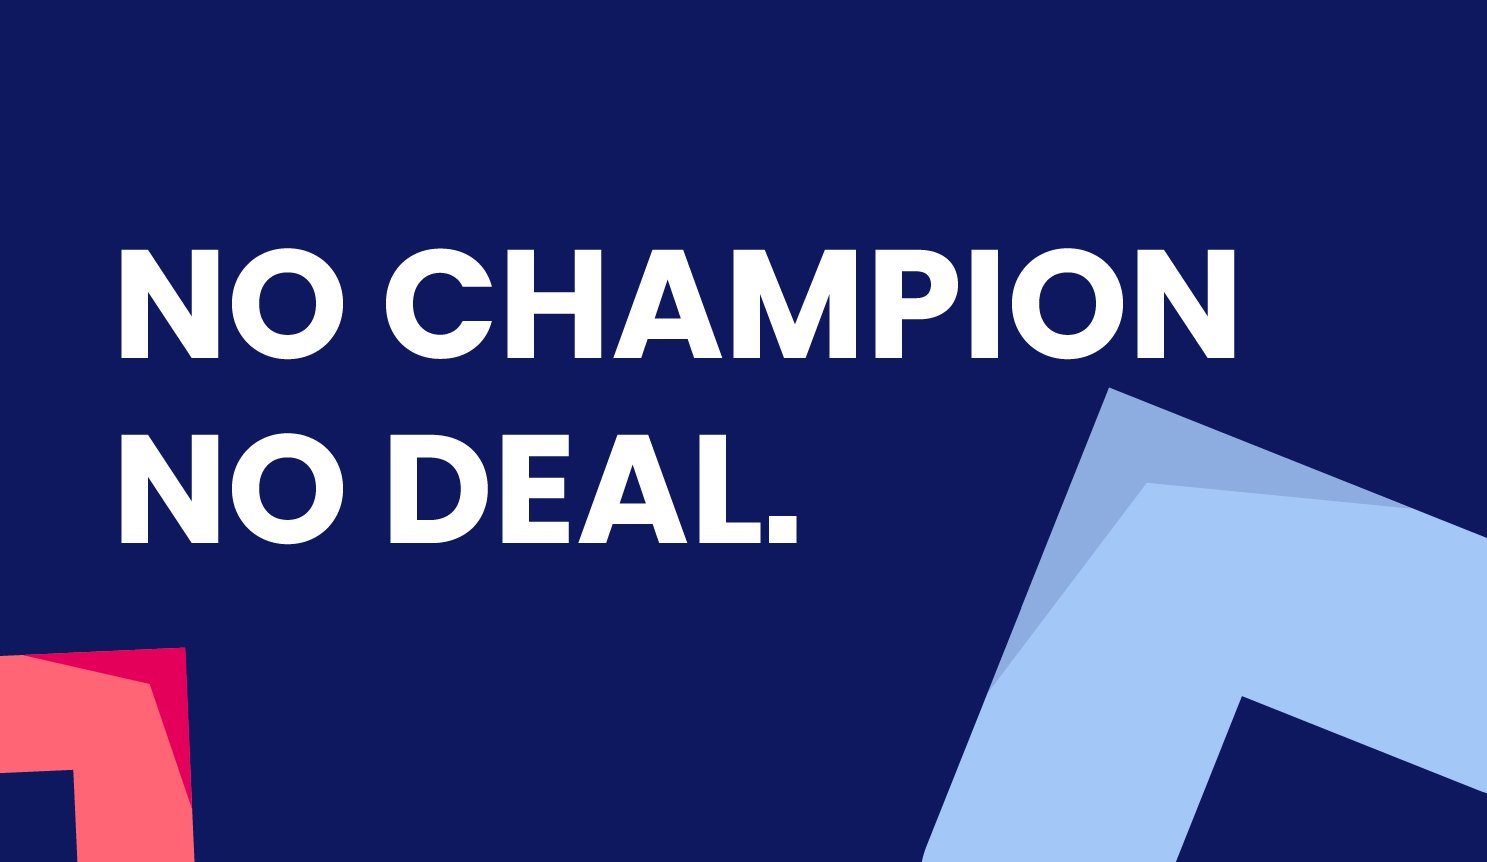 No Champion, No Deal - Your Quarterback in the Sales Process